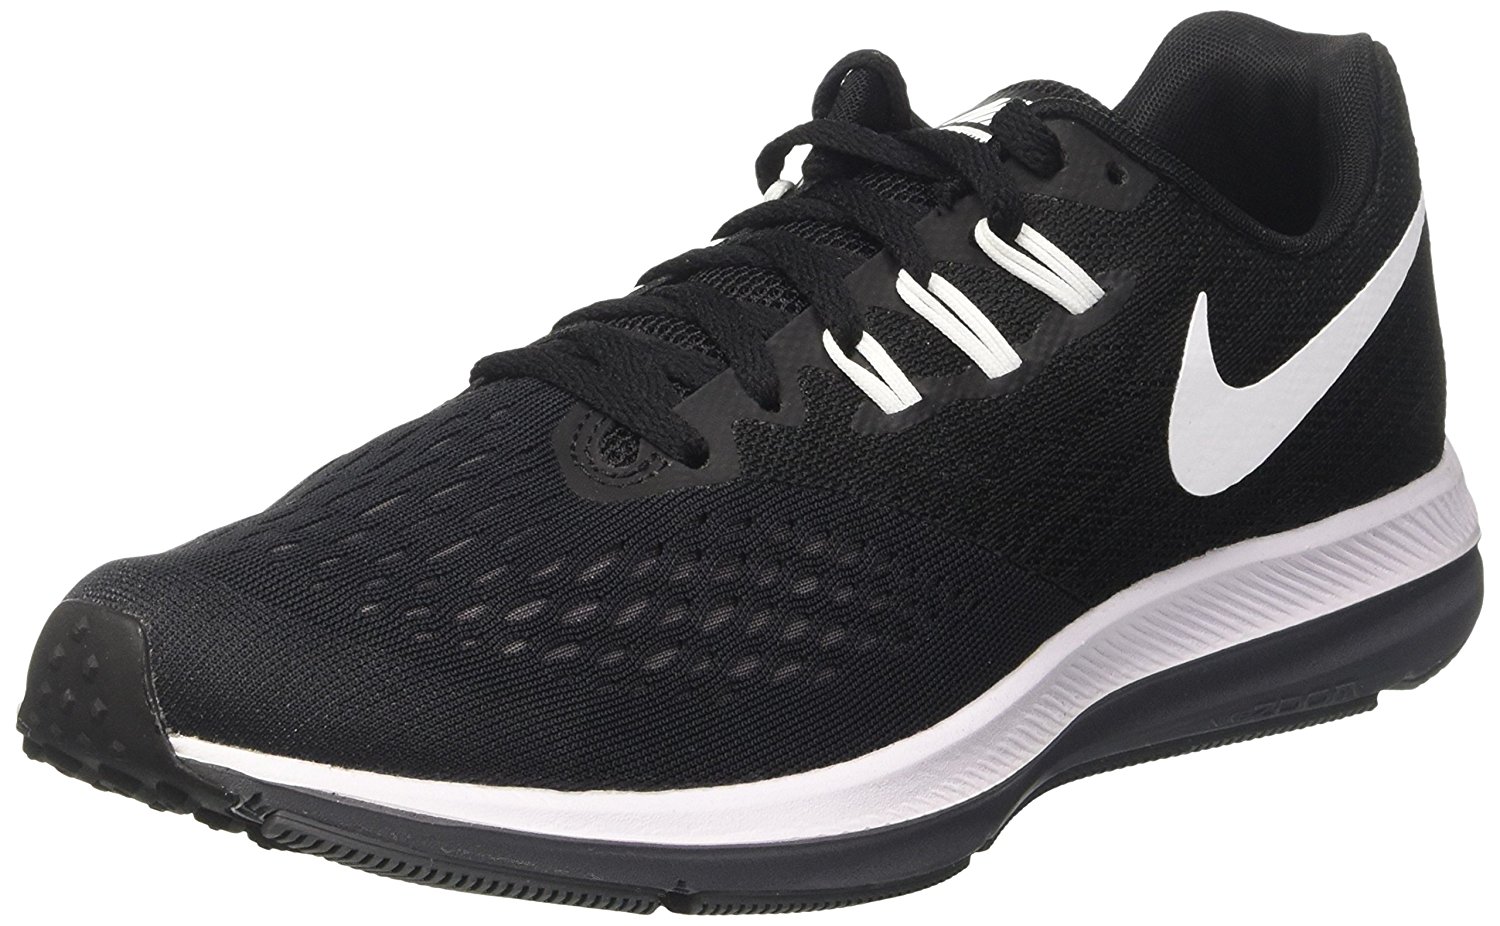 Nike Air Zoom Winflo 4 Reviewed for 